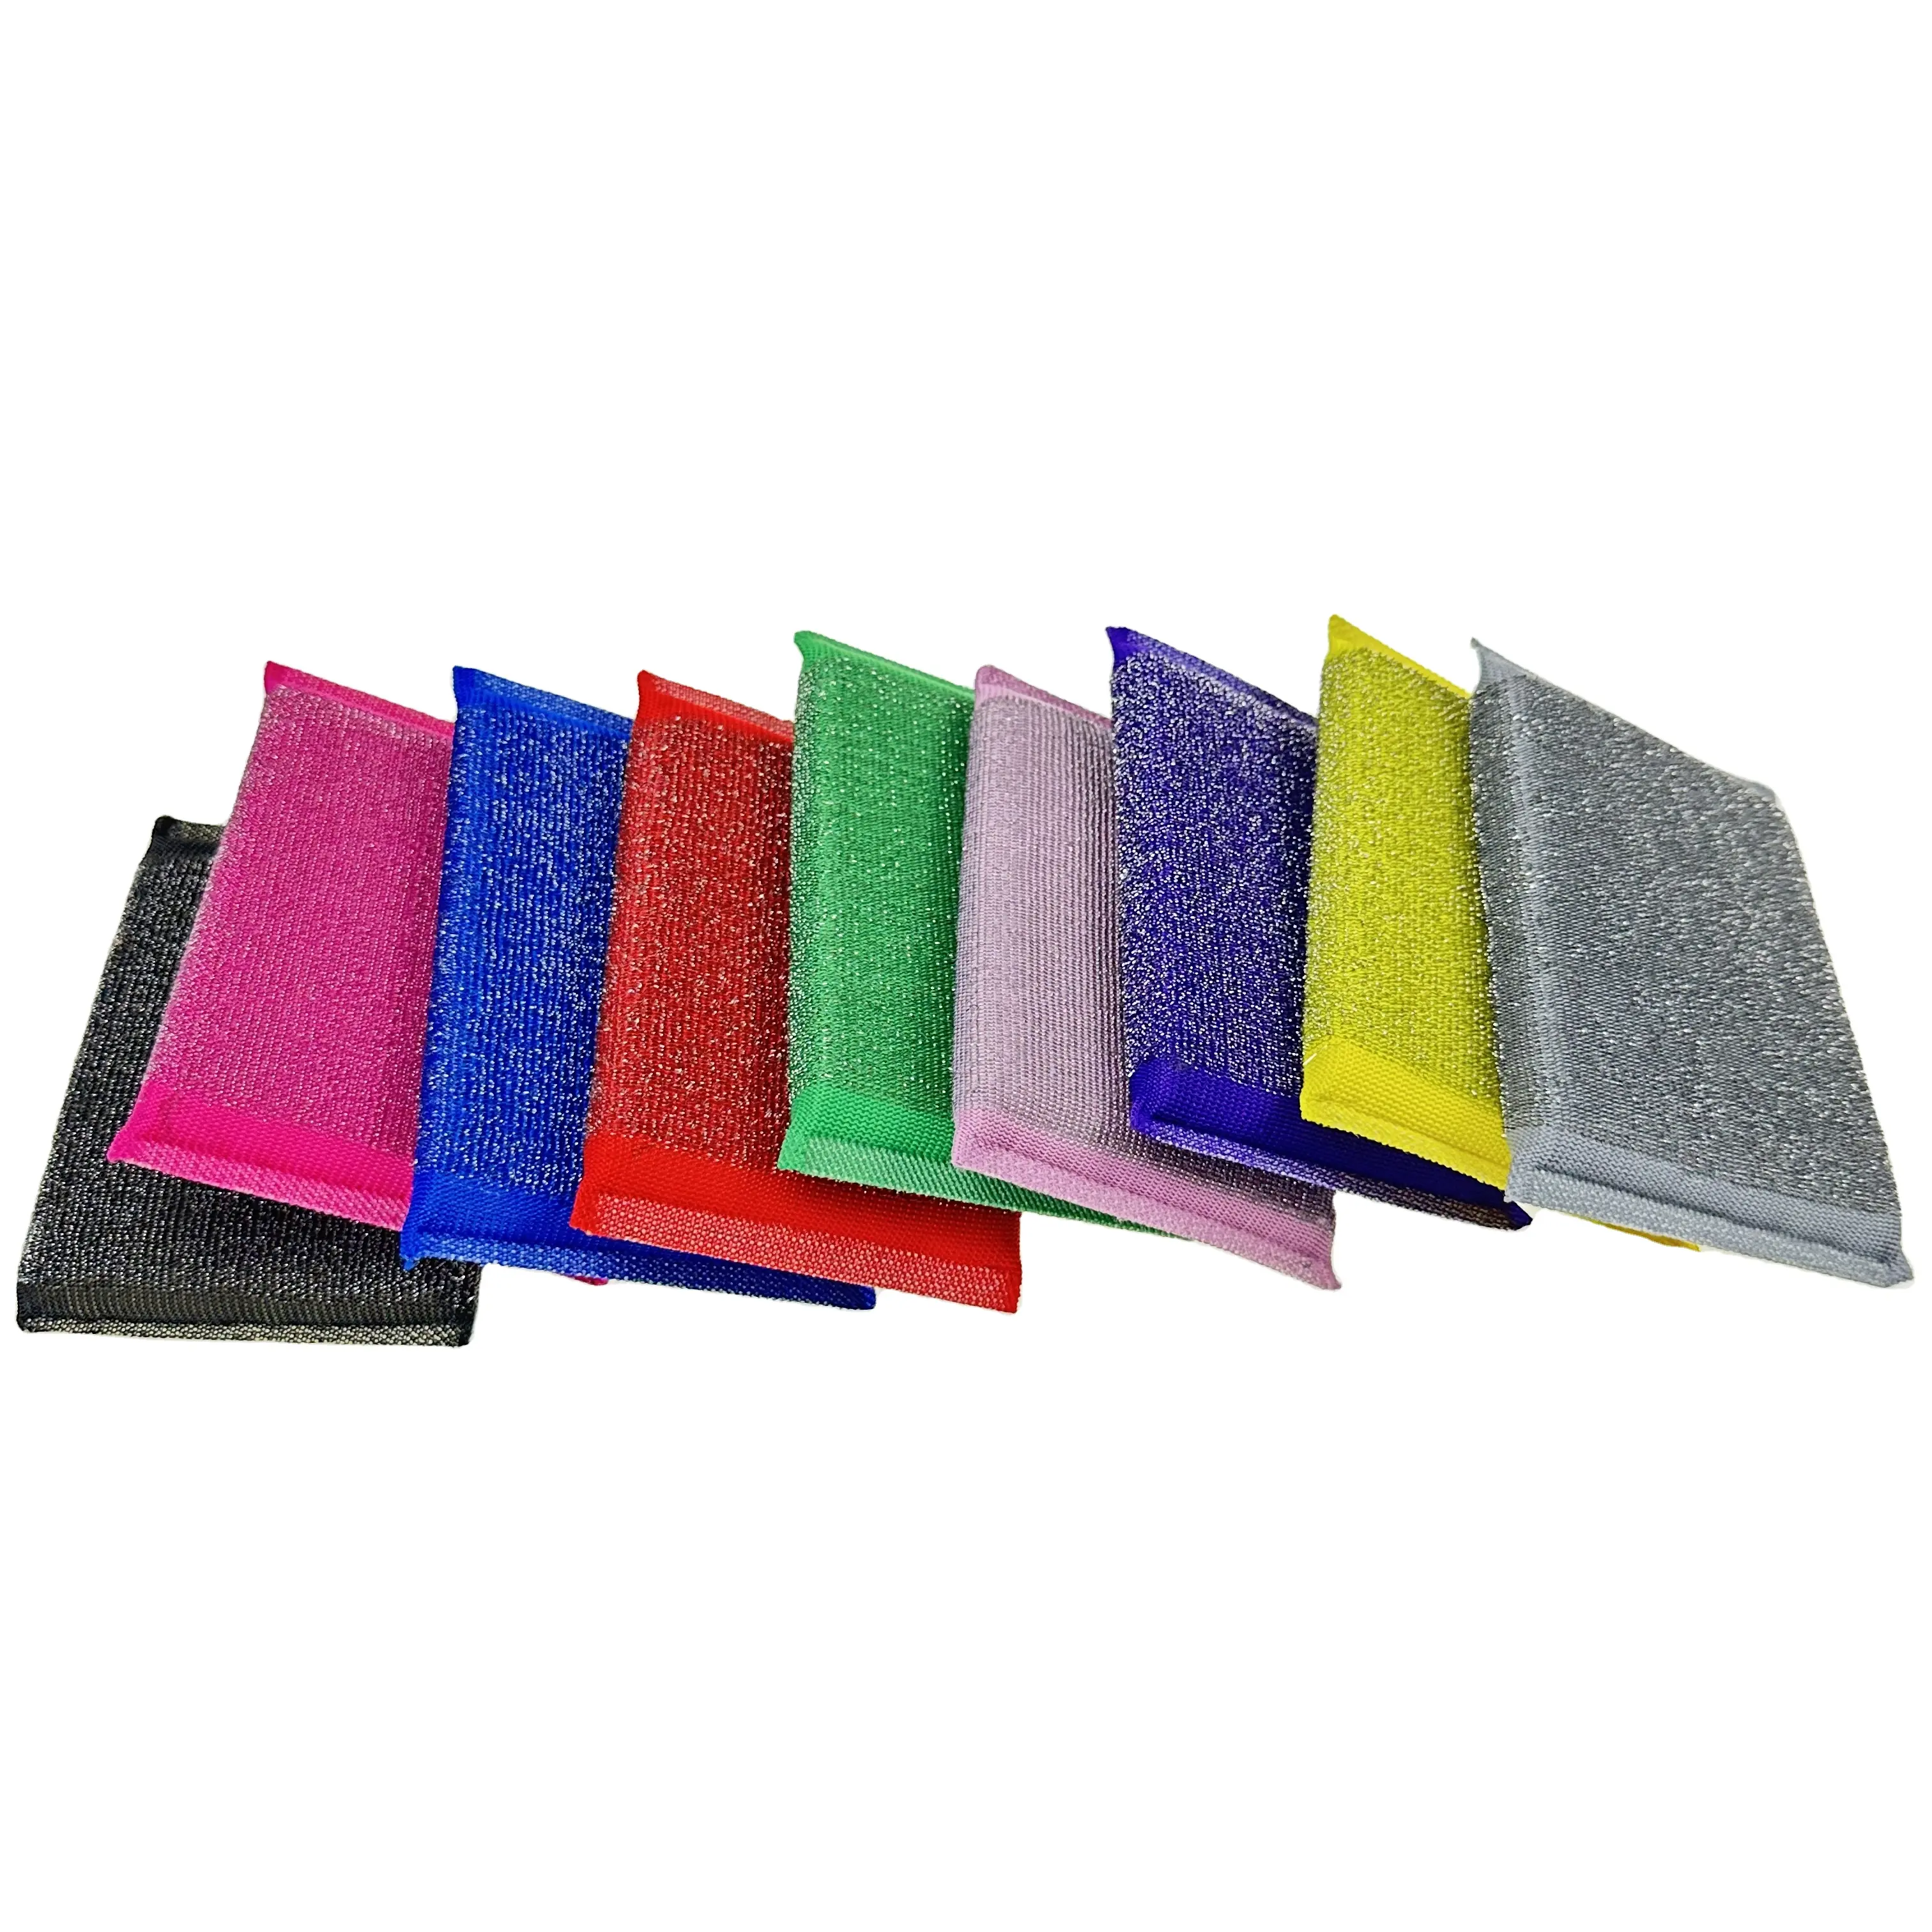 Best-selling stainless steel sponge mopping cloth sponge cleaning wire scouring pad